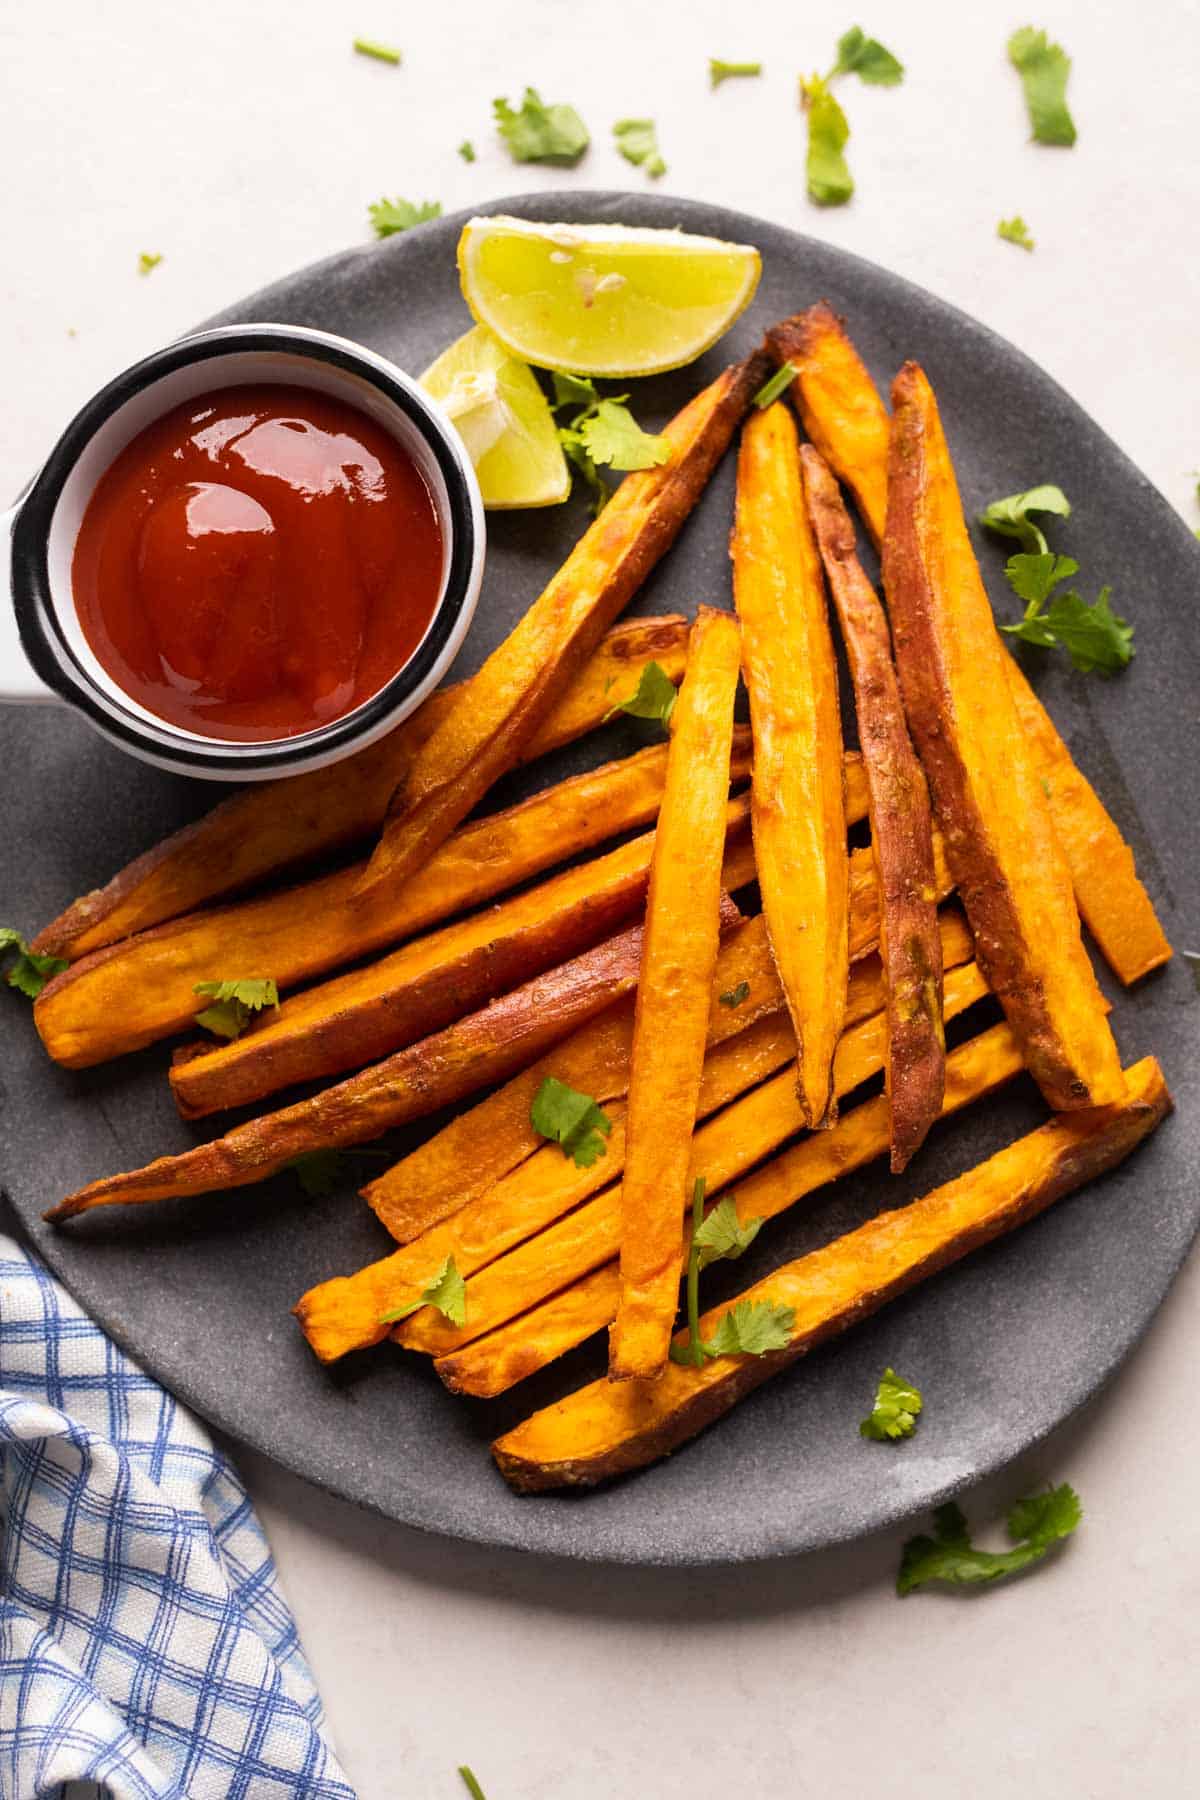 Picture of baked sweet potato fries served on a grey plate with ketchup and lime wedges on the side